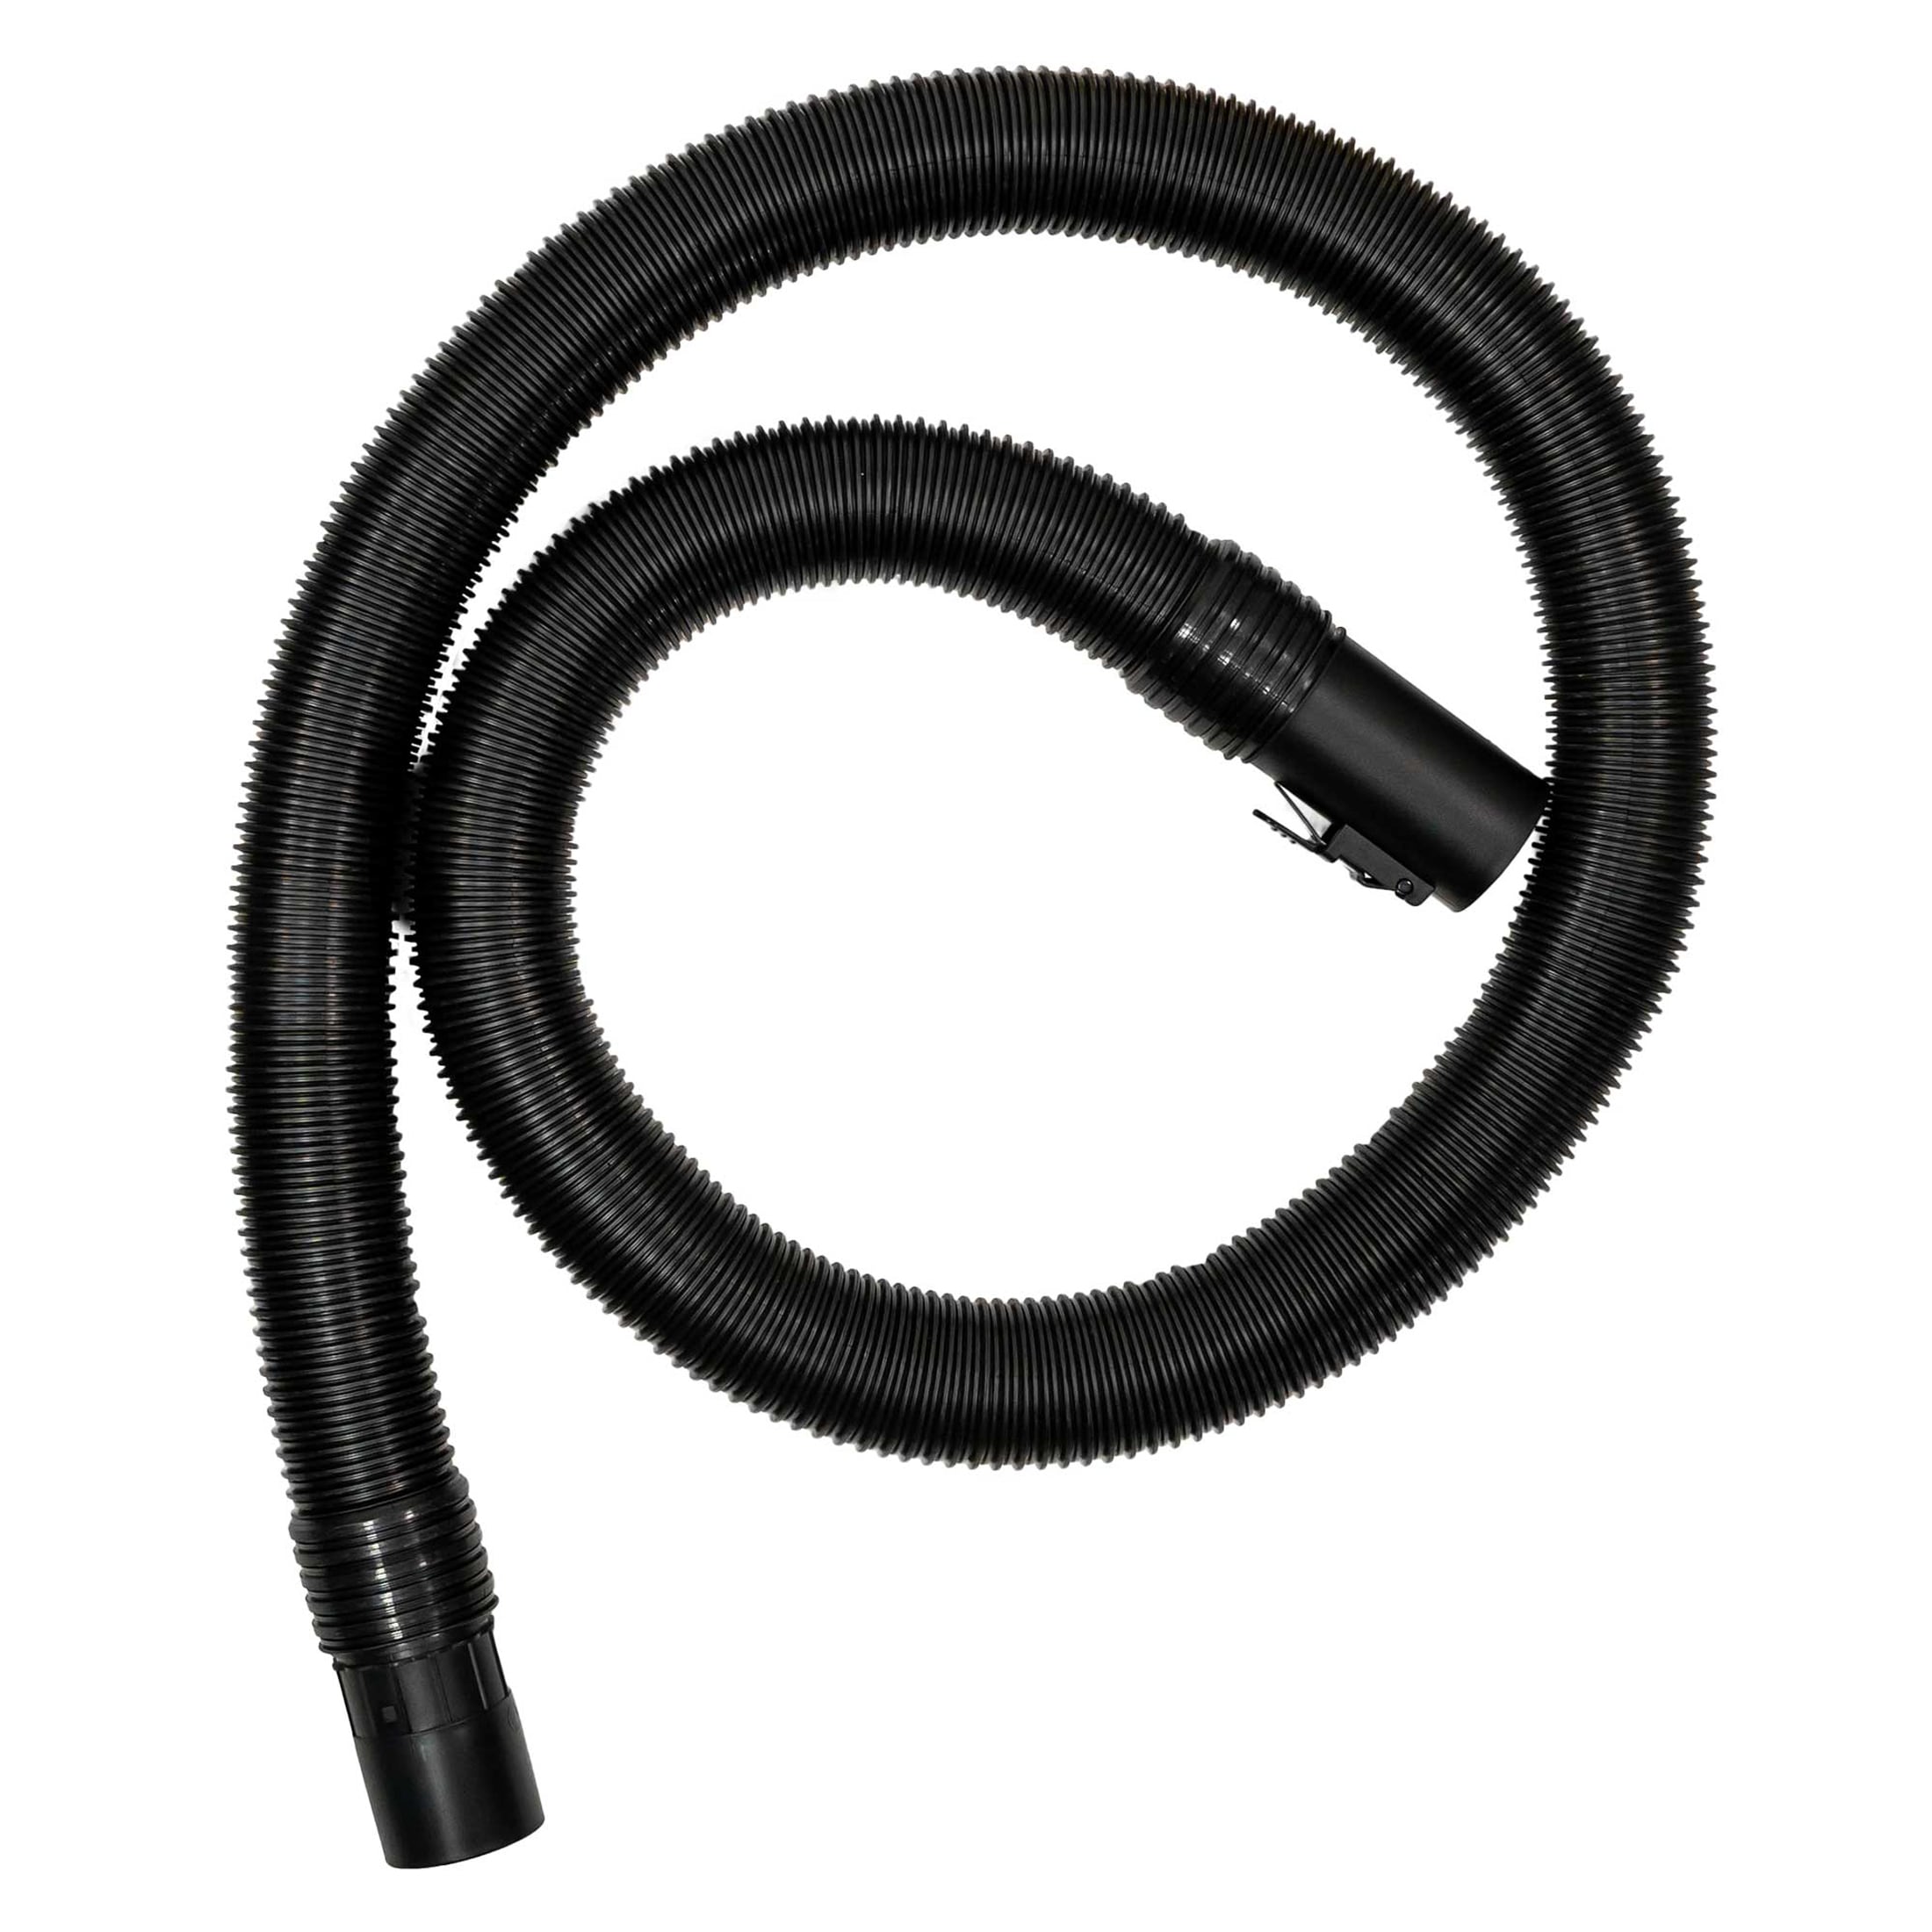 WORKSHOP Wet and Dry Vacuum Accessories Wet and Dry Vacuum Hose, 1-1/4 in.  x 6 ft. at Tractor Supply Co.